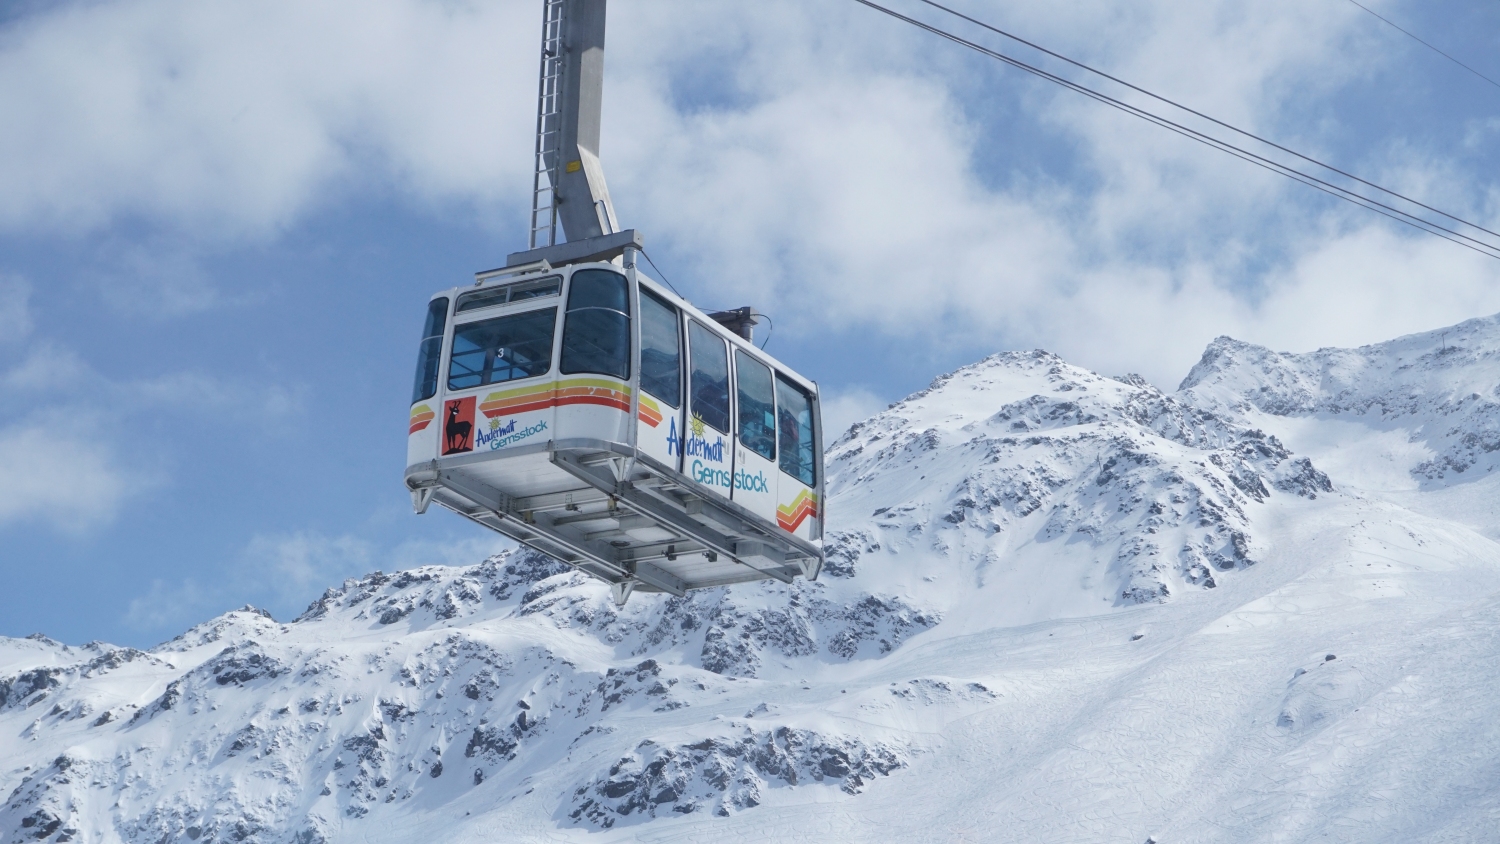 Cable cart with snowy mountain background